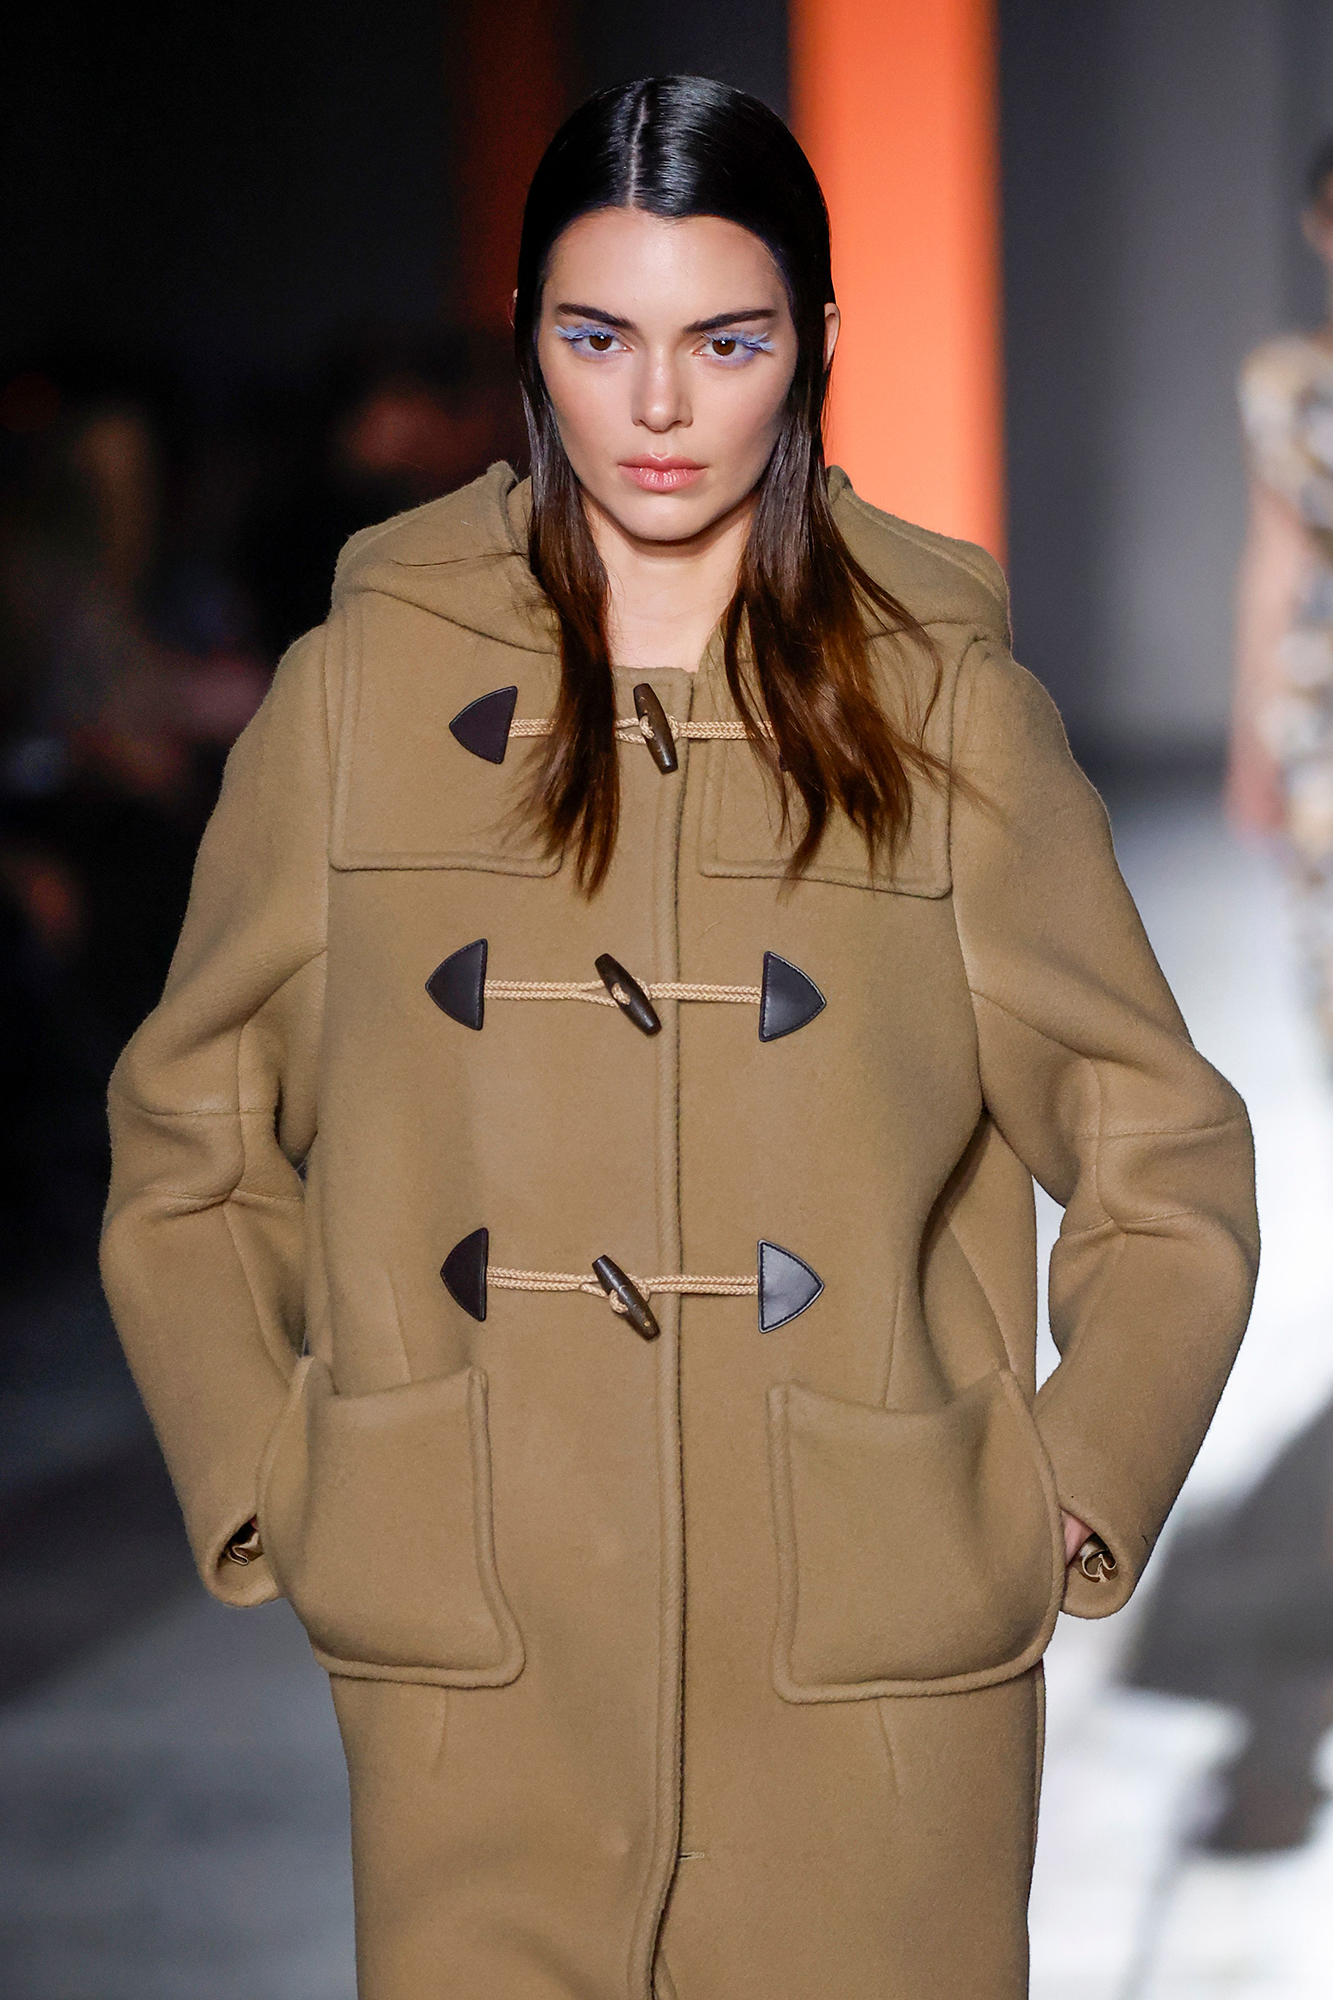 Kendall Jenner makes runway appearance for Prada's Fall/Winter 2023 show -  Good Morning America